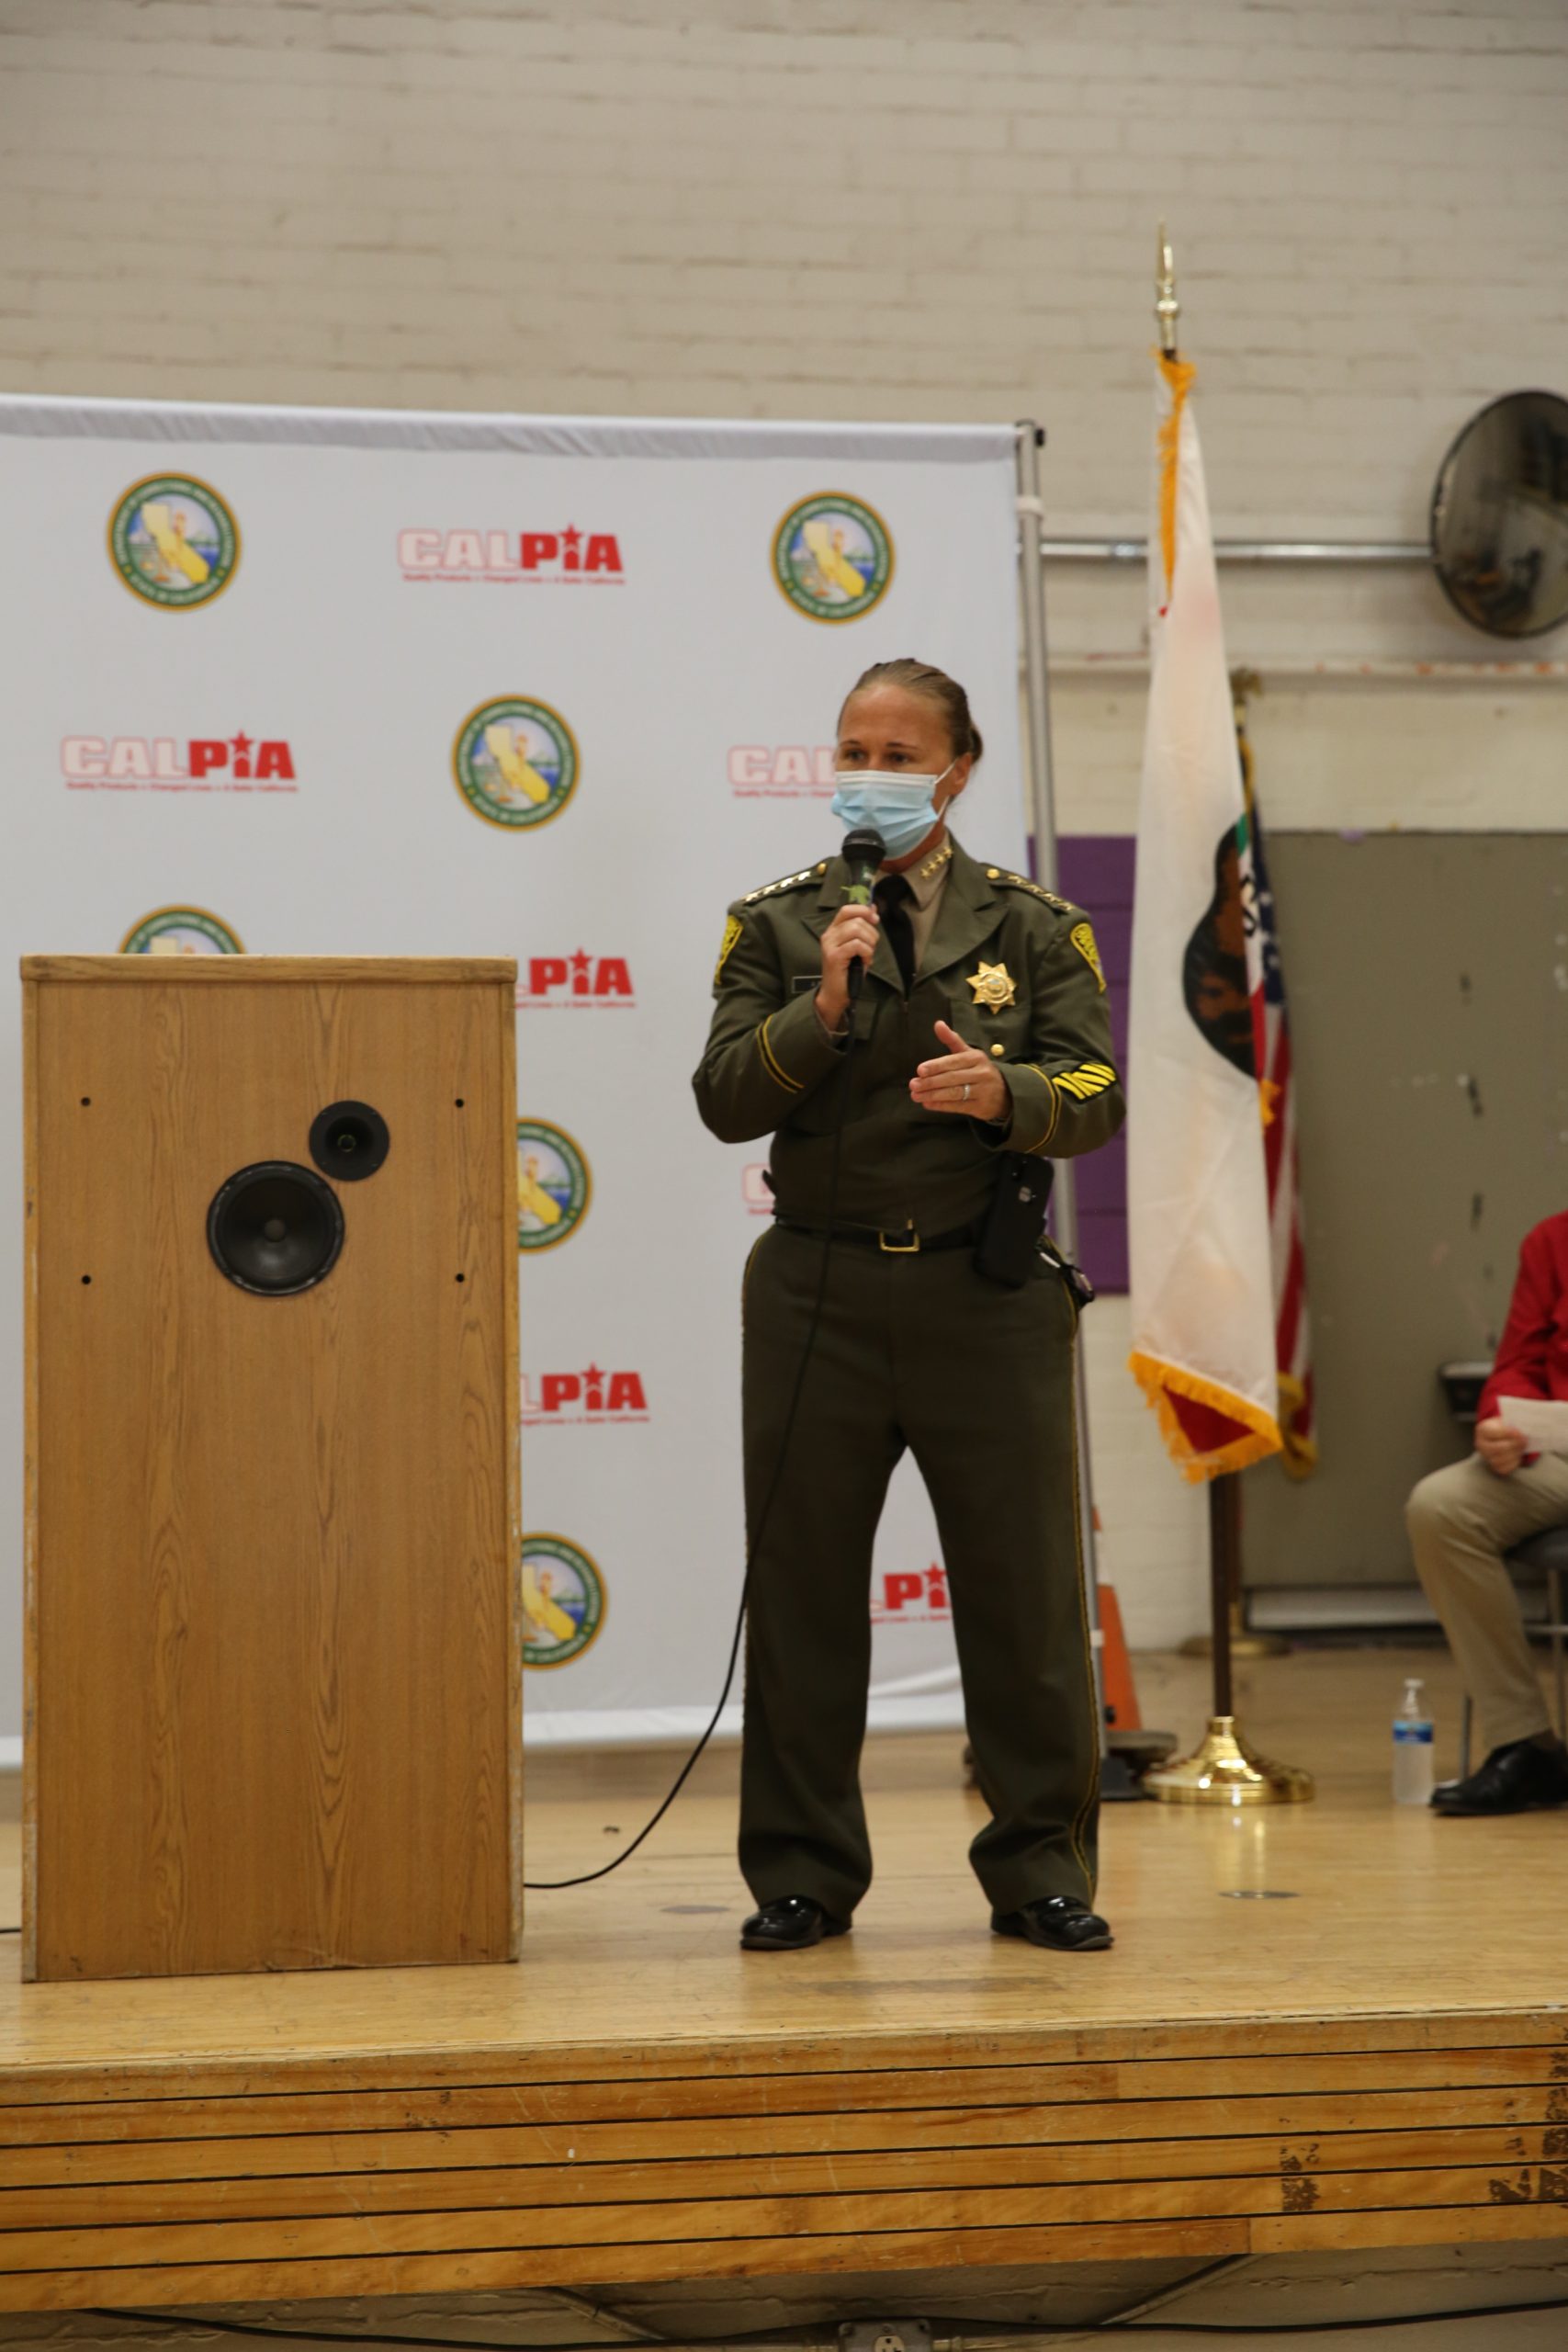 A woman in a correctional uniform and mask holding a microphone